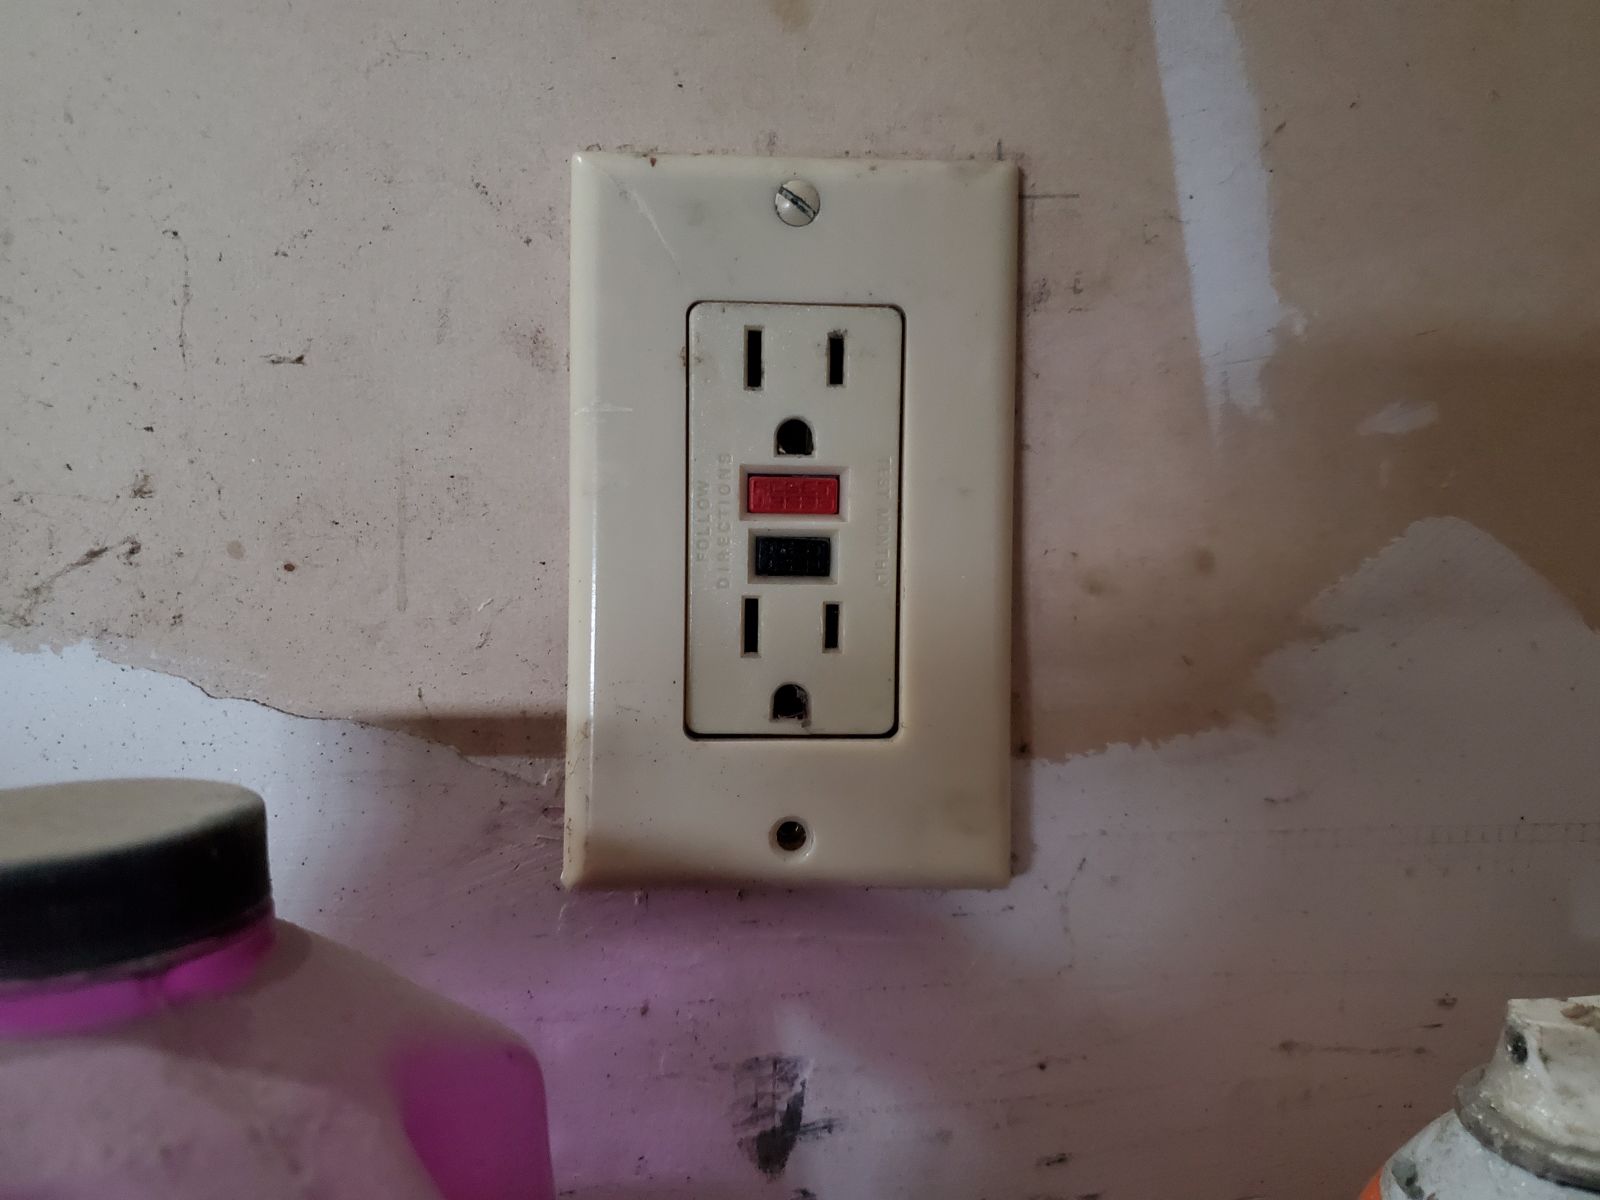 This socket and fuse reset button seems to supply the garage, in the past when the circuit blows its reset here rather then the breaker panel 